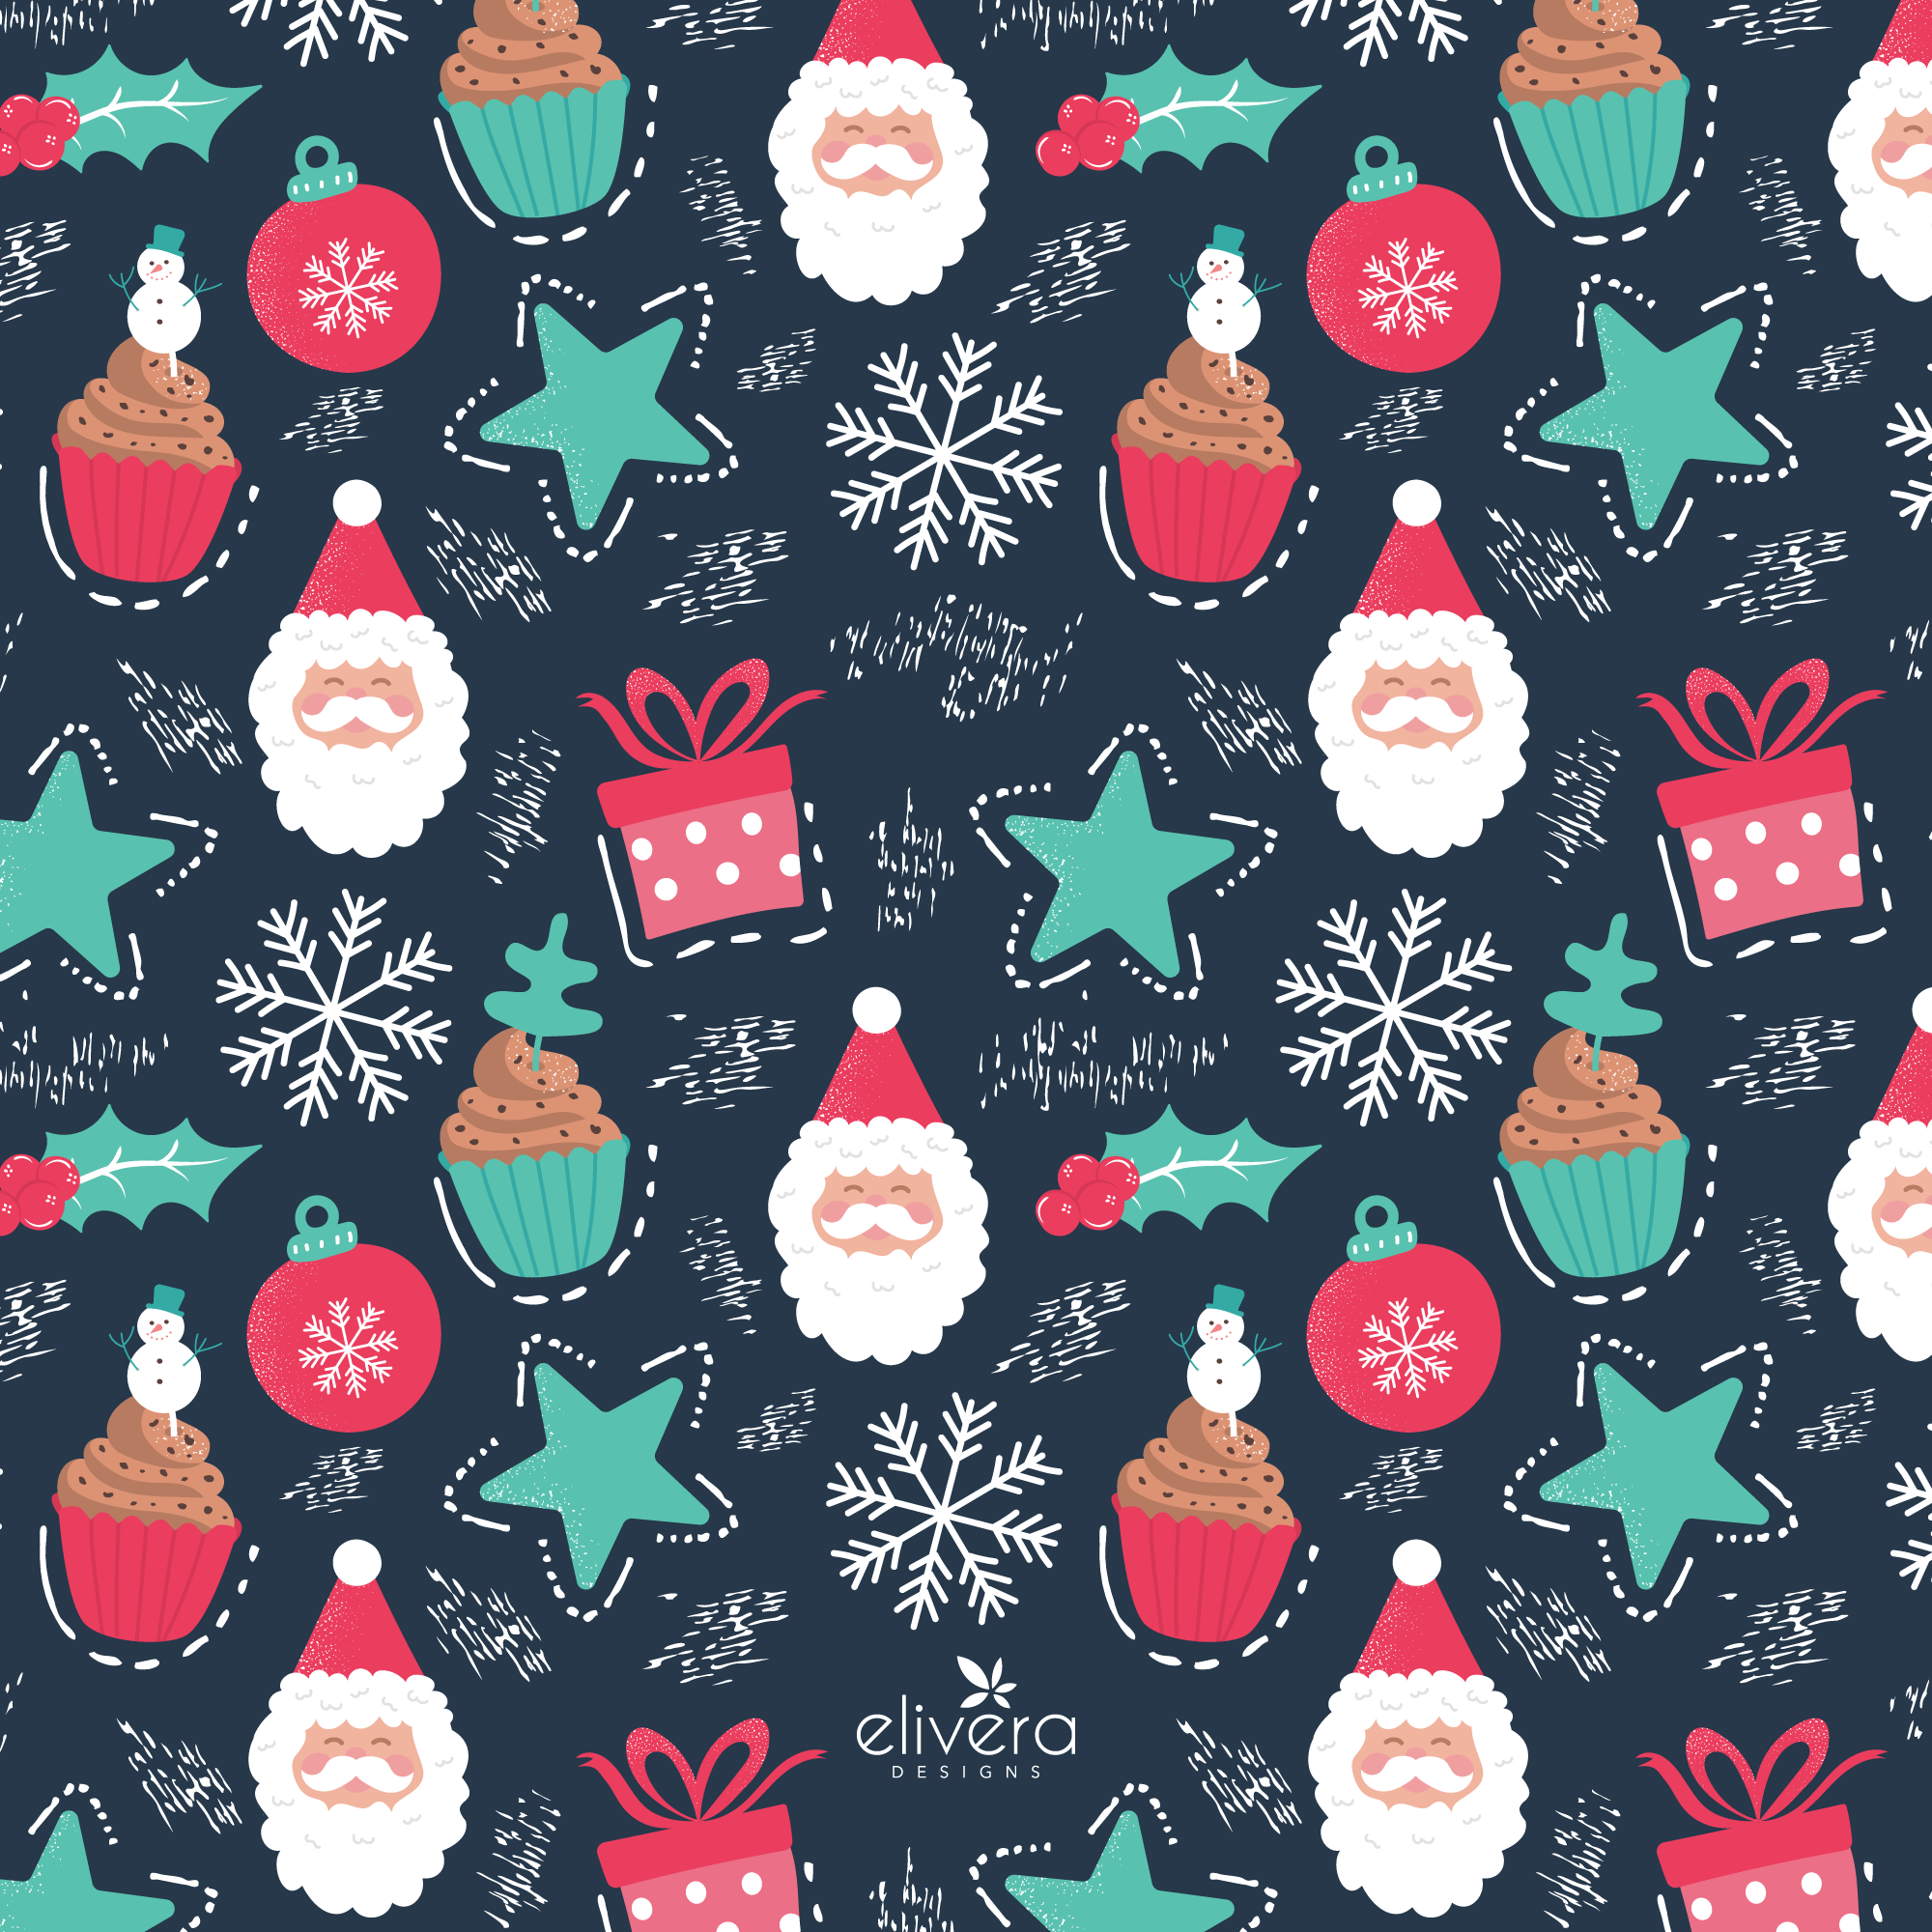 Christmas Santa Claus Gifts and Xmas Tree Decorations Pattern by Elivera Designs